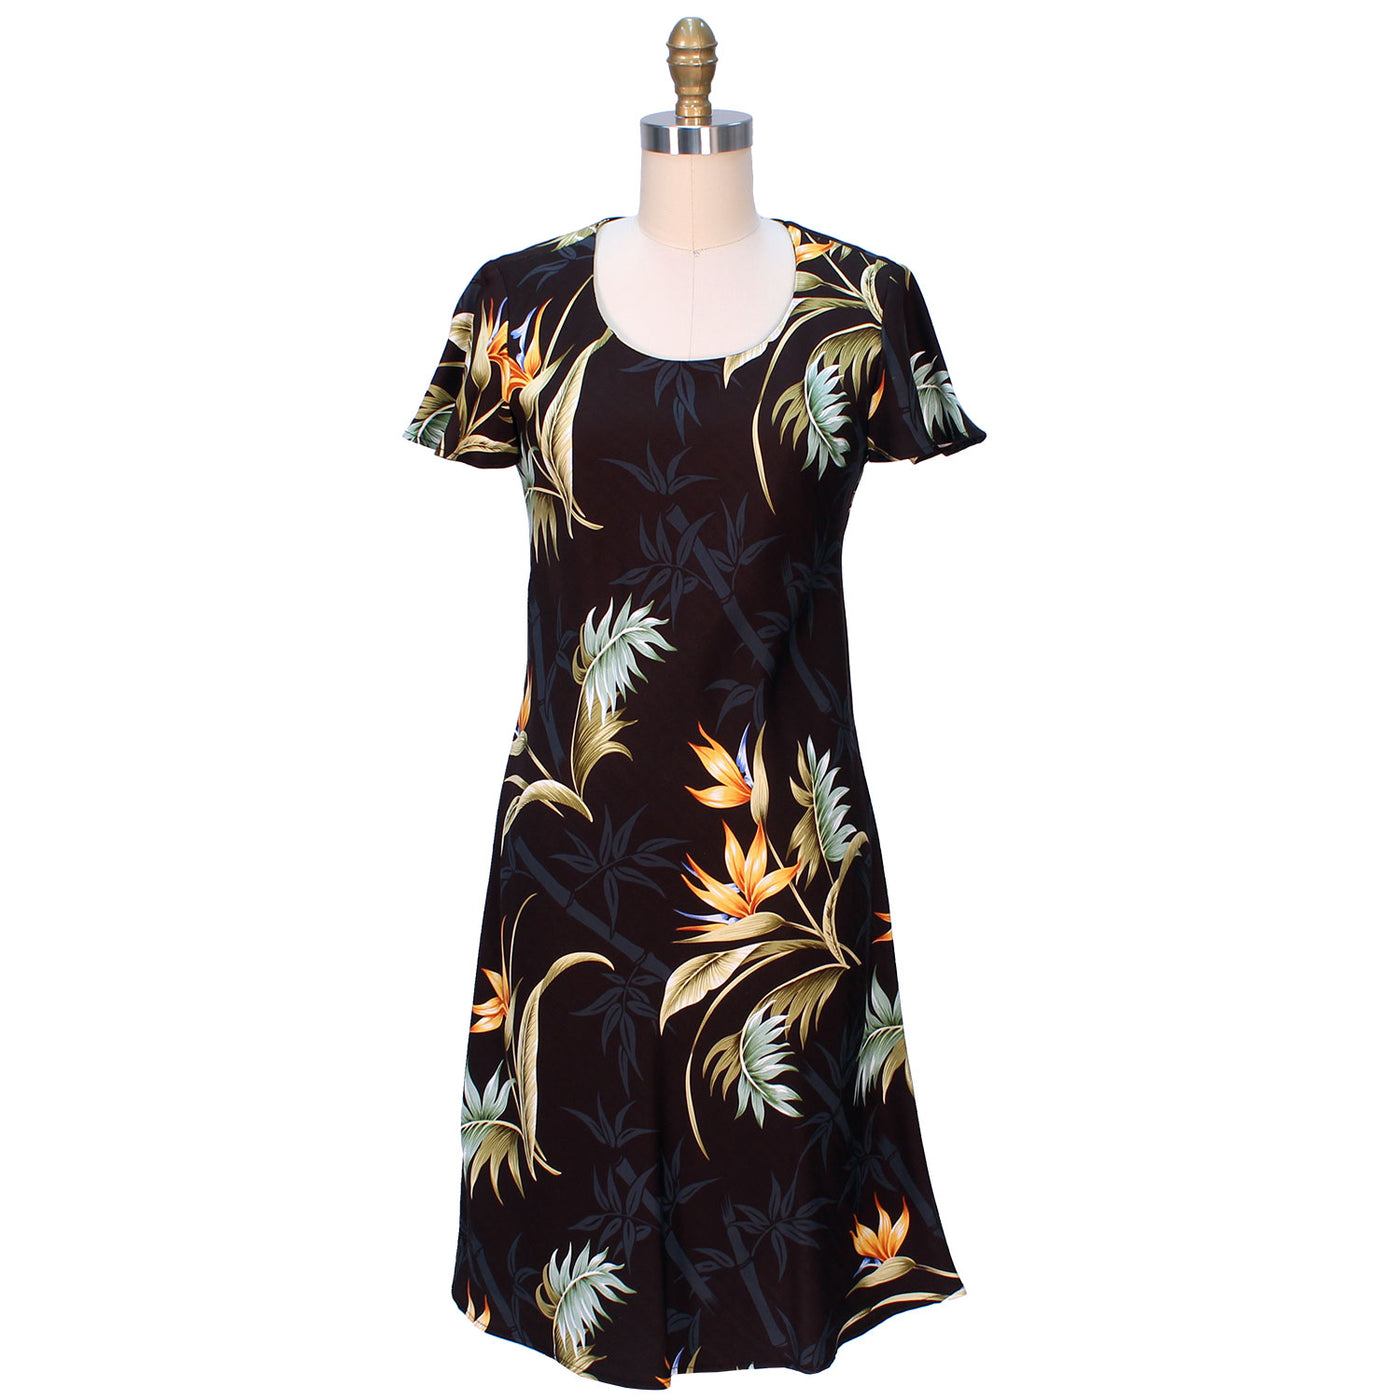 Bamboo Paradise Black A-Line Dress with Cap Sleeves